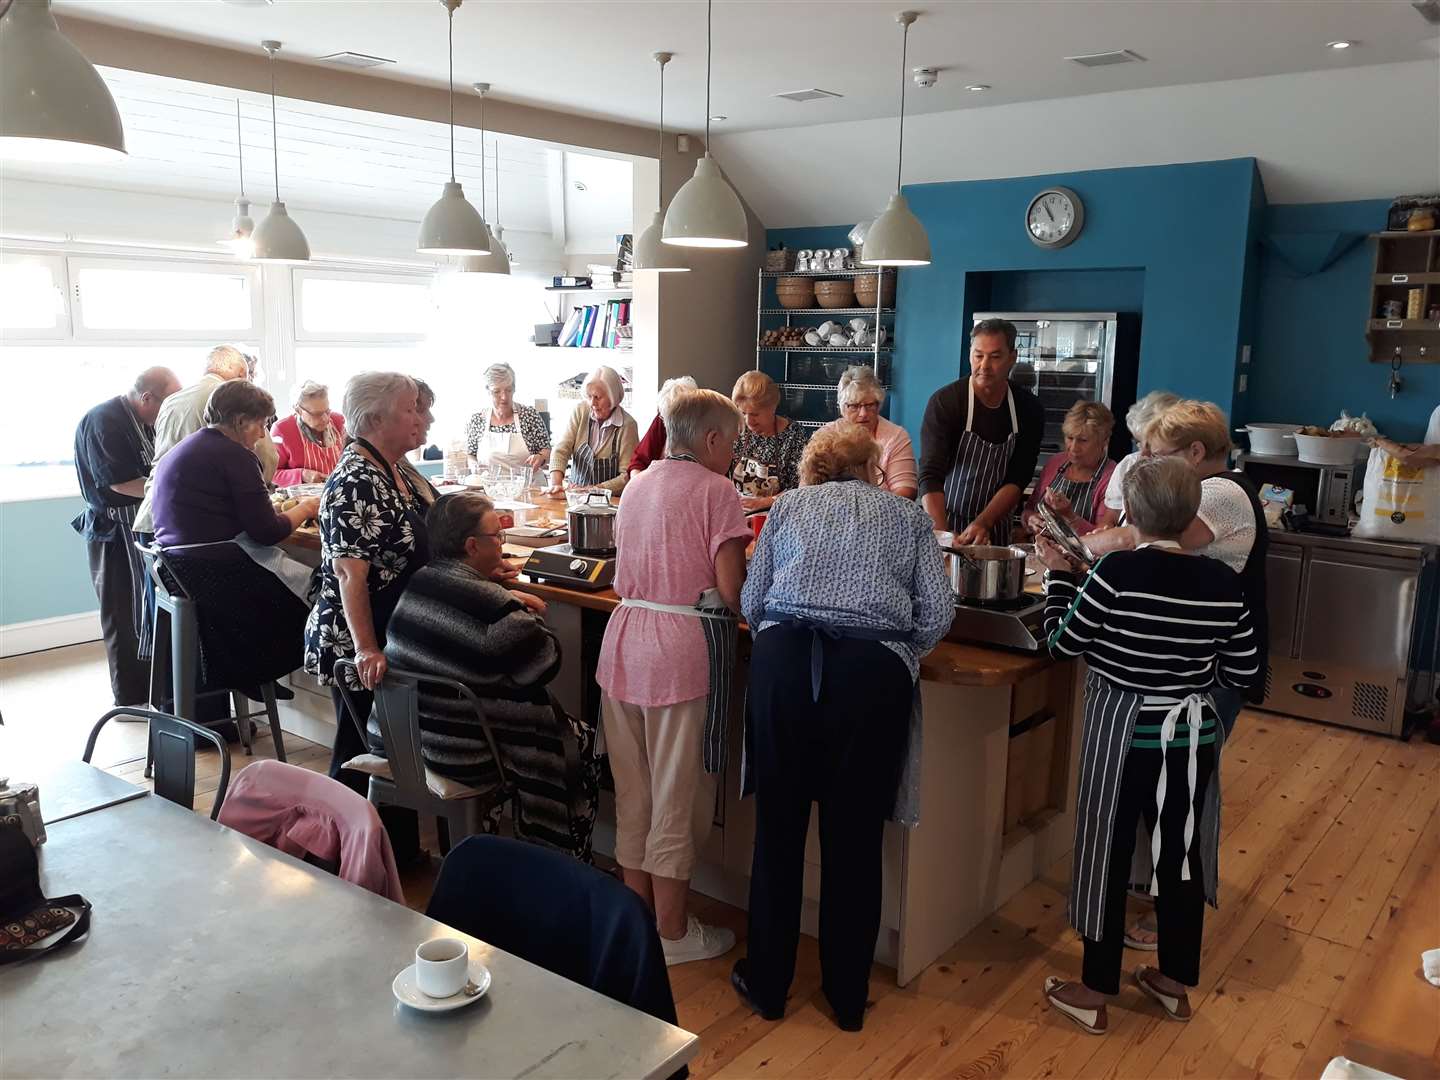 Pieter Van Zyl of Chequers Kitchen leads a cookery workshop